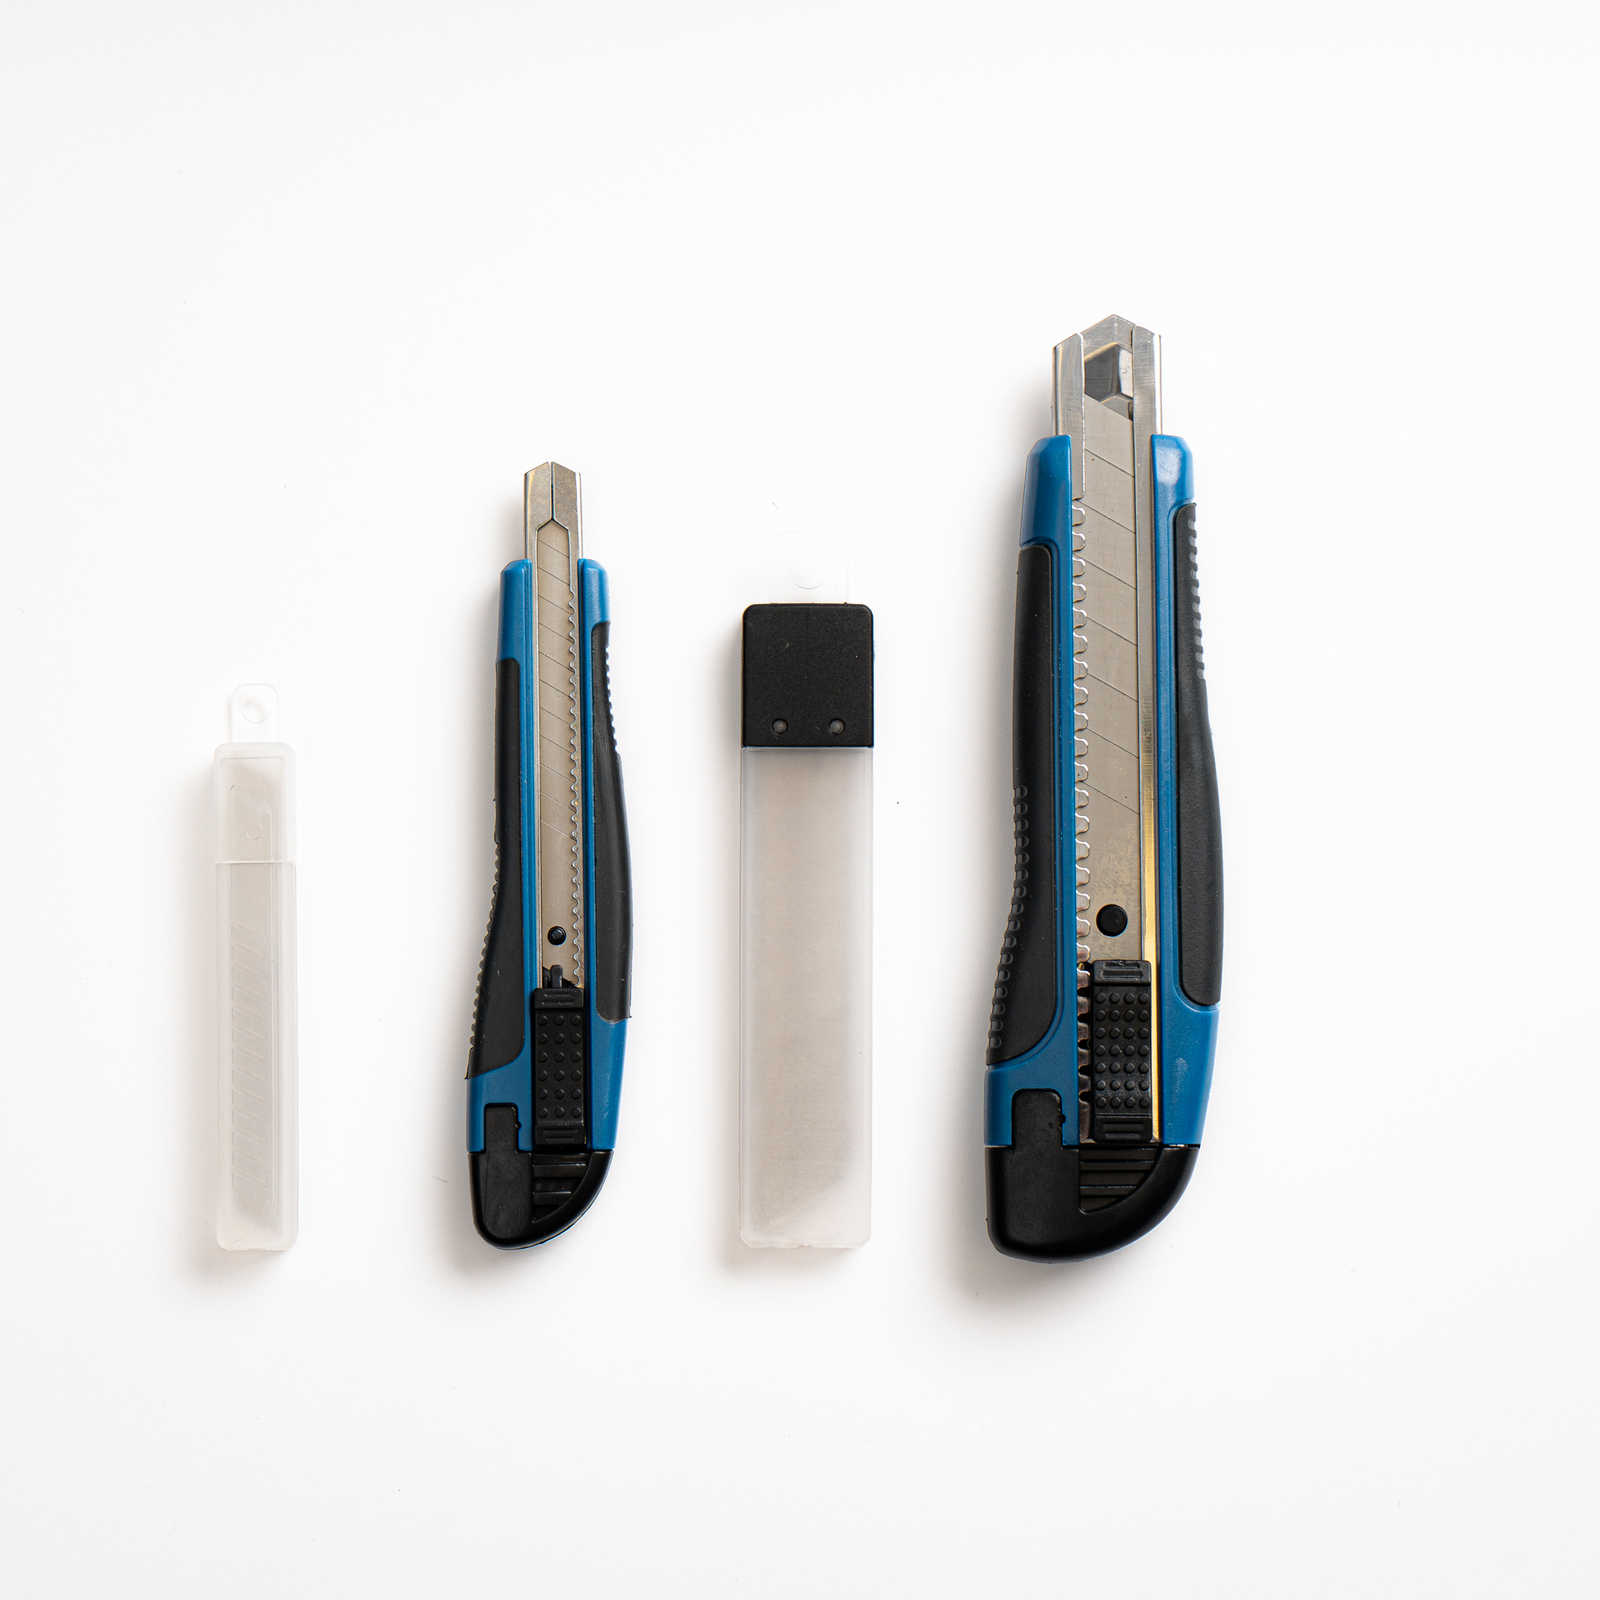         utility knife set with spare blades
    